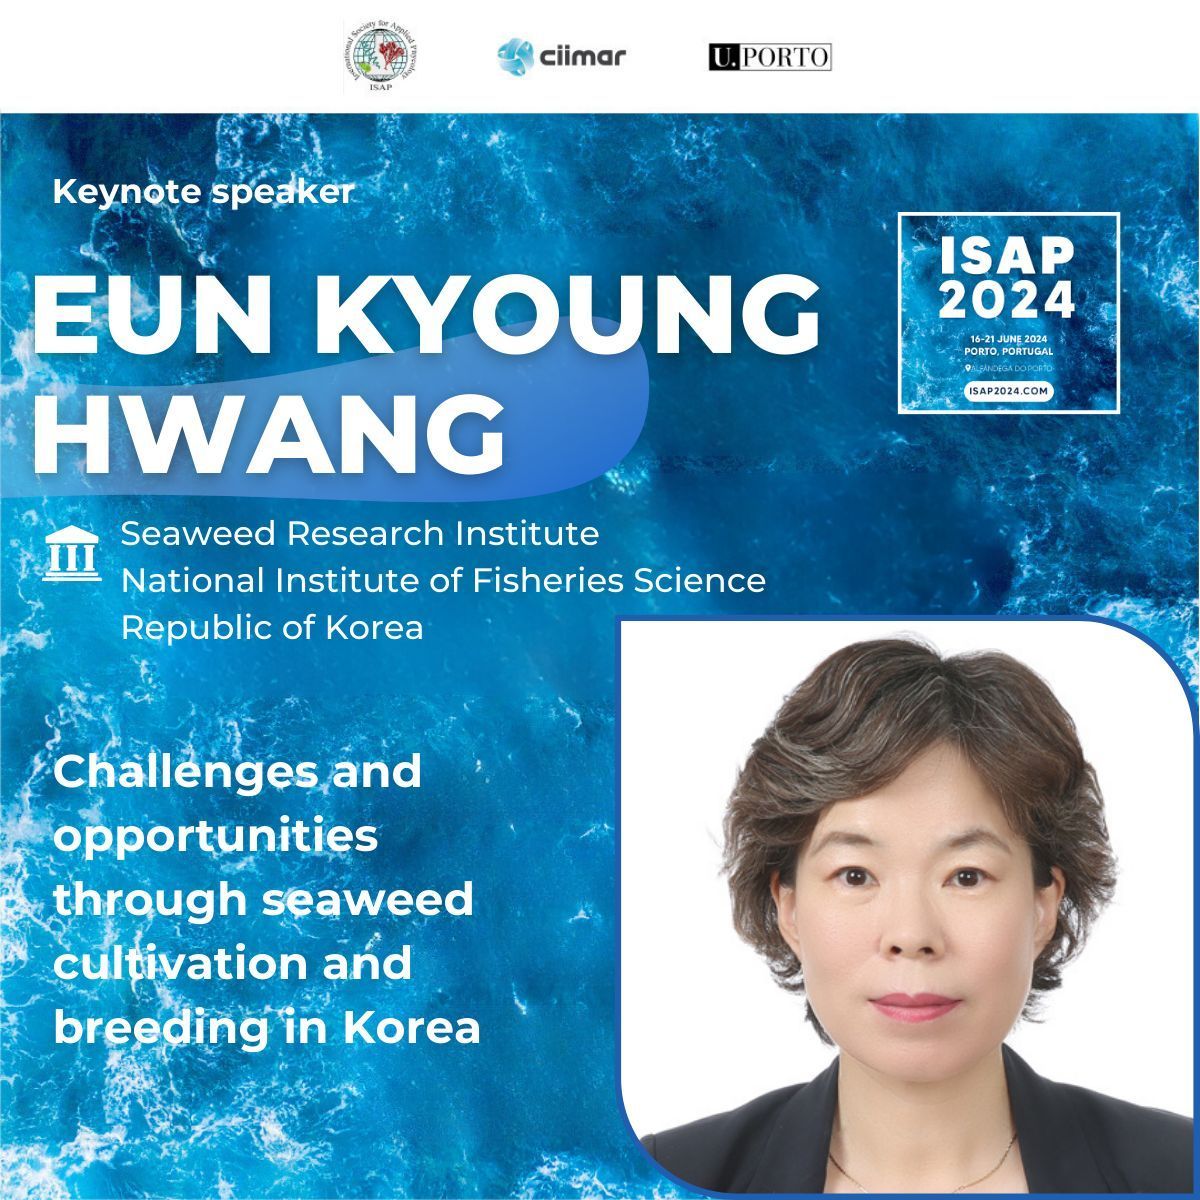 We are honoured to have Dr Eun Kyoung Hwan join us as Keynote speaker!
Dr Hwan will be talking about Challenges and opportunities through seaweed cultivation and breeding in Korea.
#ISAP2024 #algaeconference #seaweed #ISAP #microalgae #macroalage